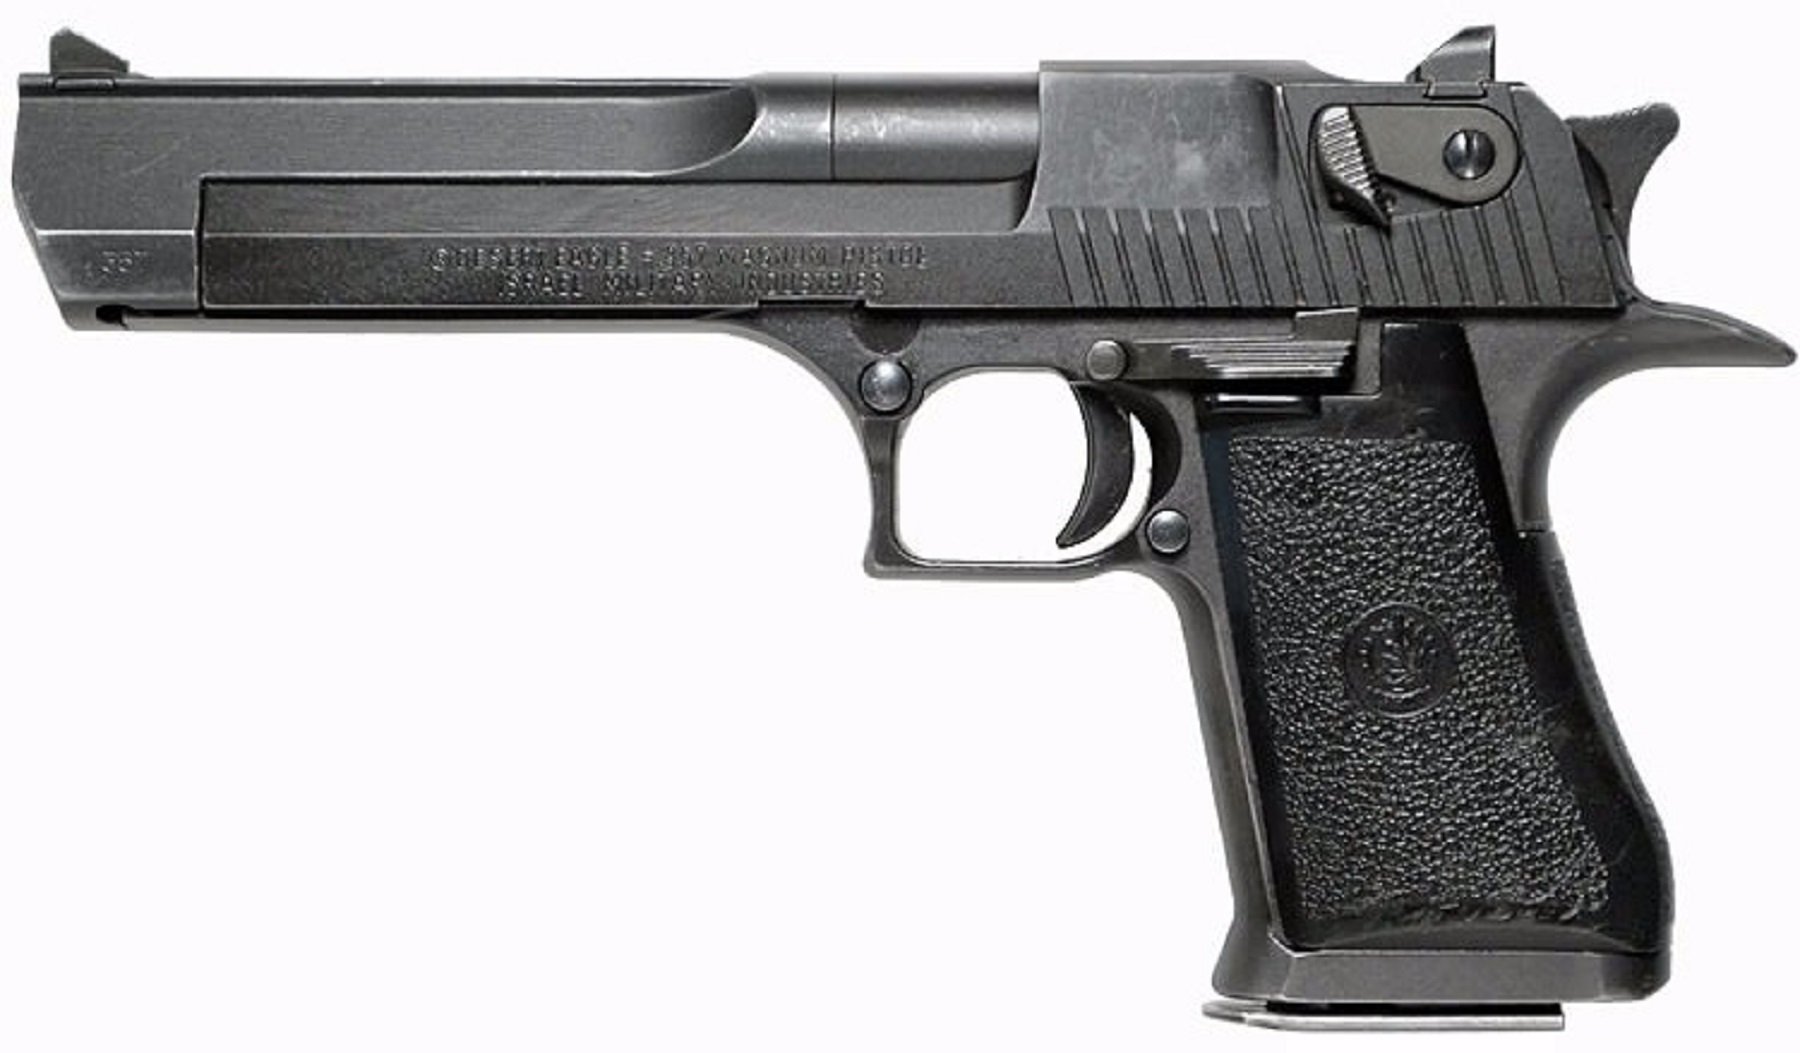 The Desert Eagle: A Rifle Disguised as a Pistol? | The National Interest